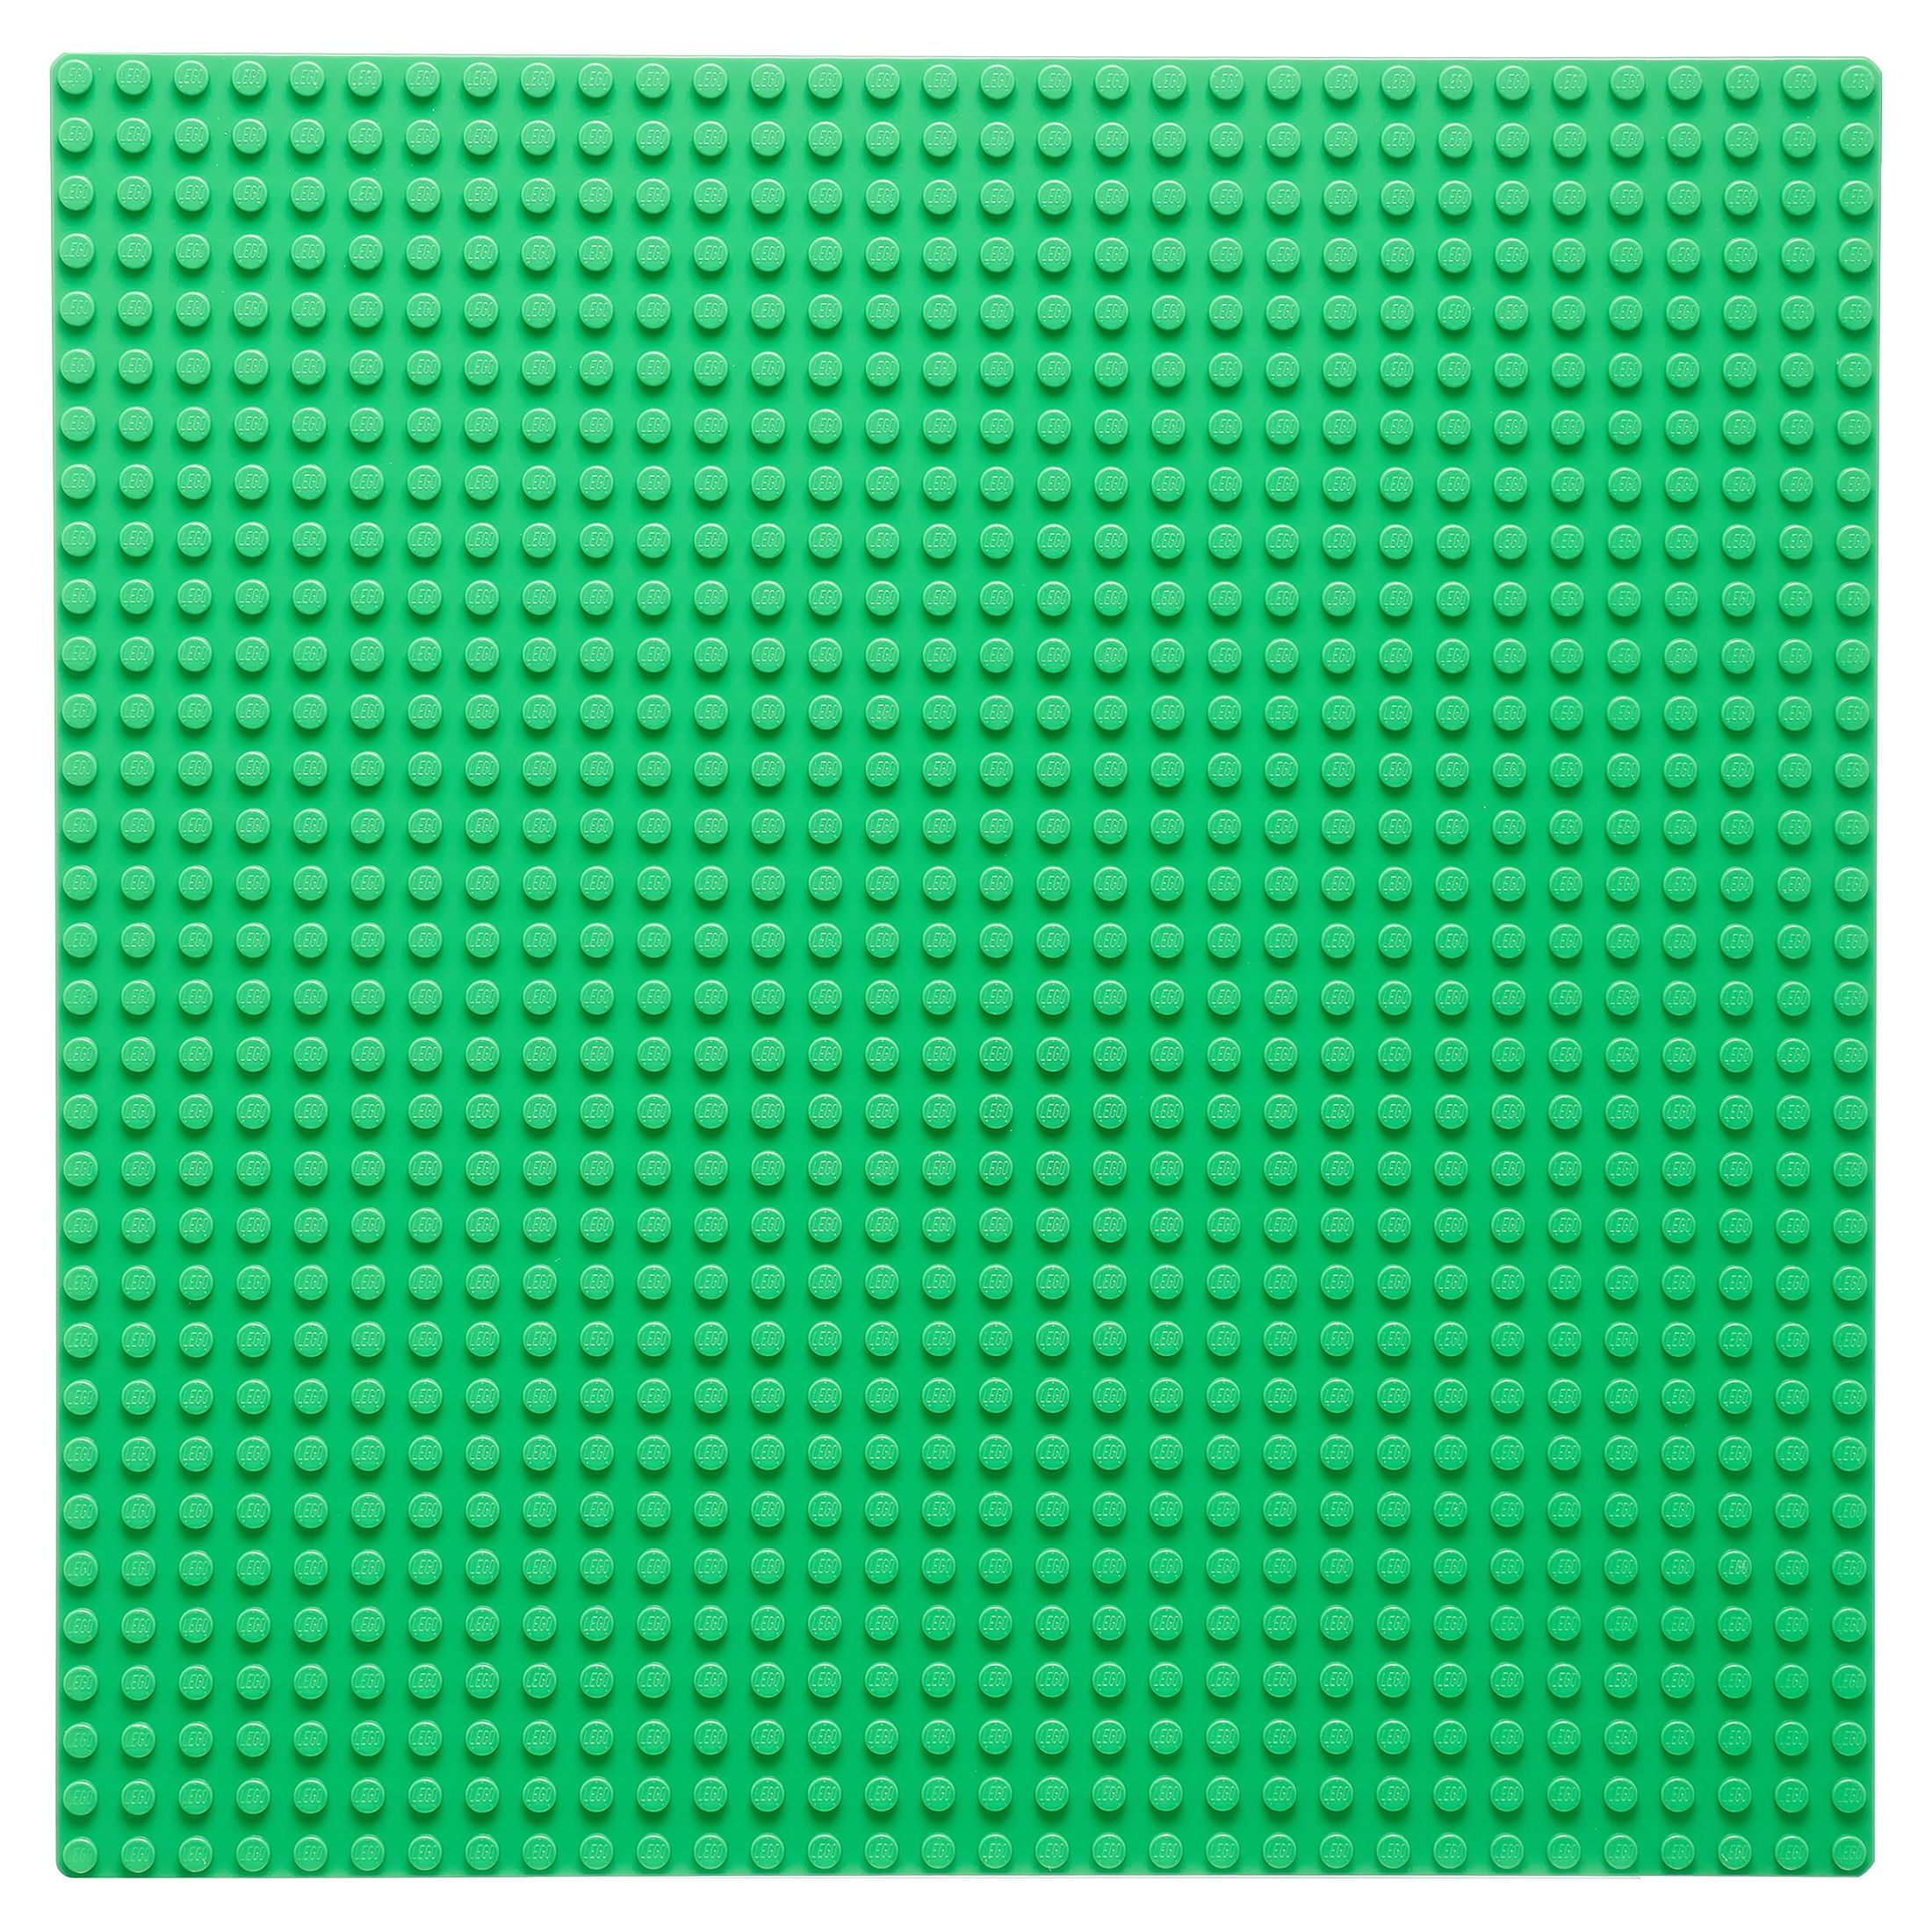 LEGO Classic Green Baseplate 10700 Building Accessory (1 Piece) - image 4 of 6